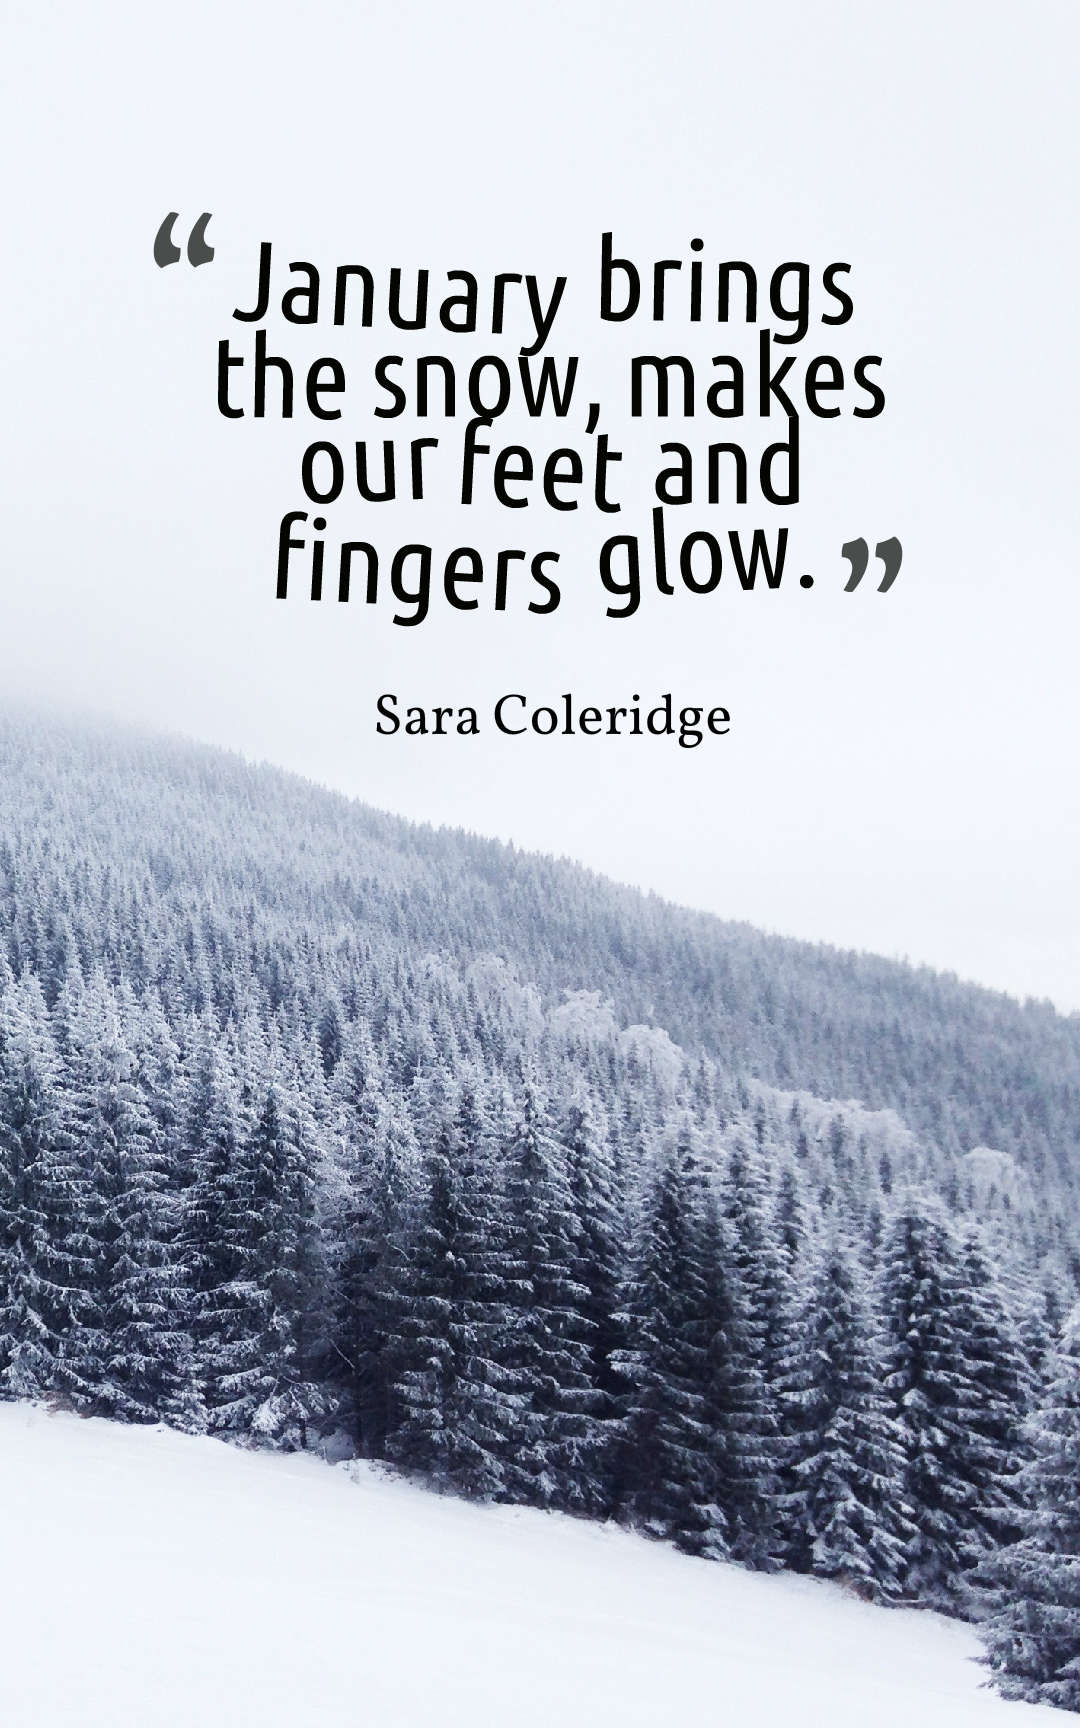 January brings the snow, makes our feet and fingers glow.